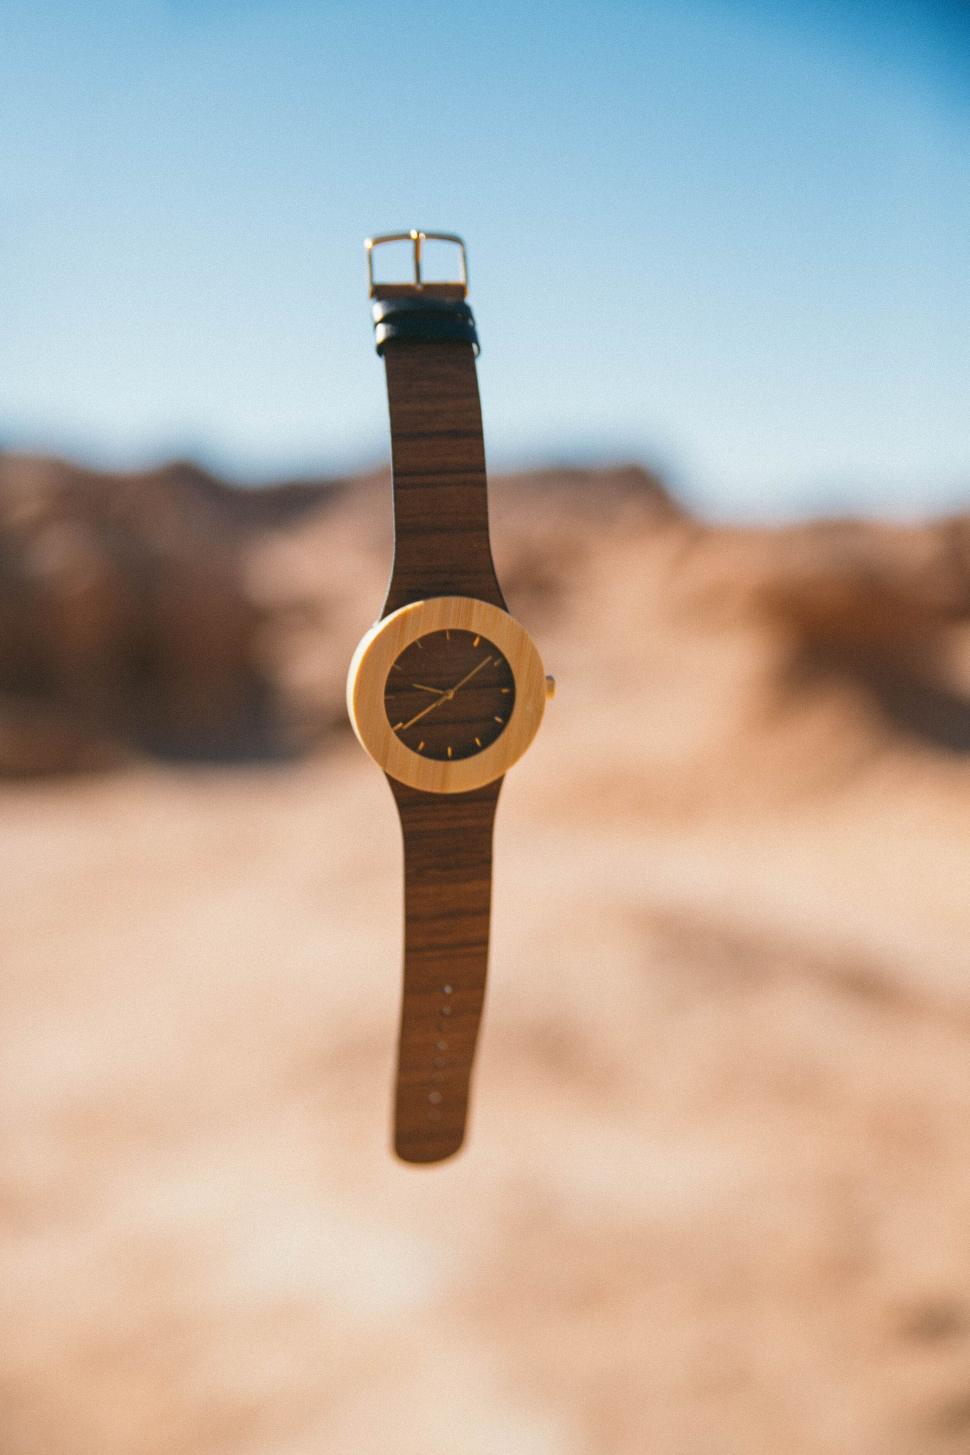 Free Image of Focused wooden watch in a desert 